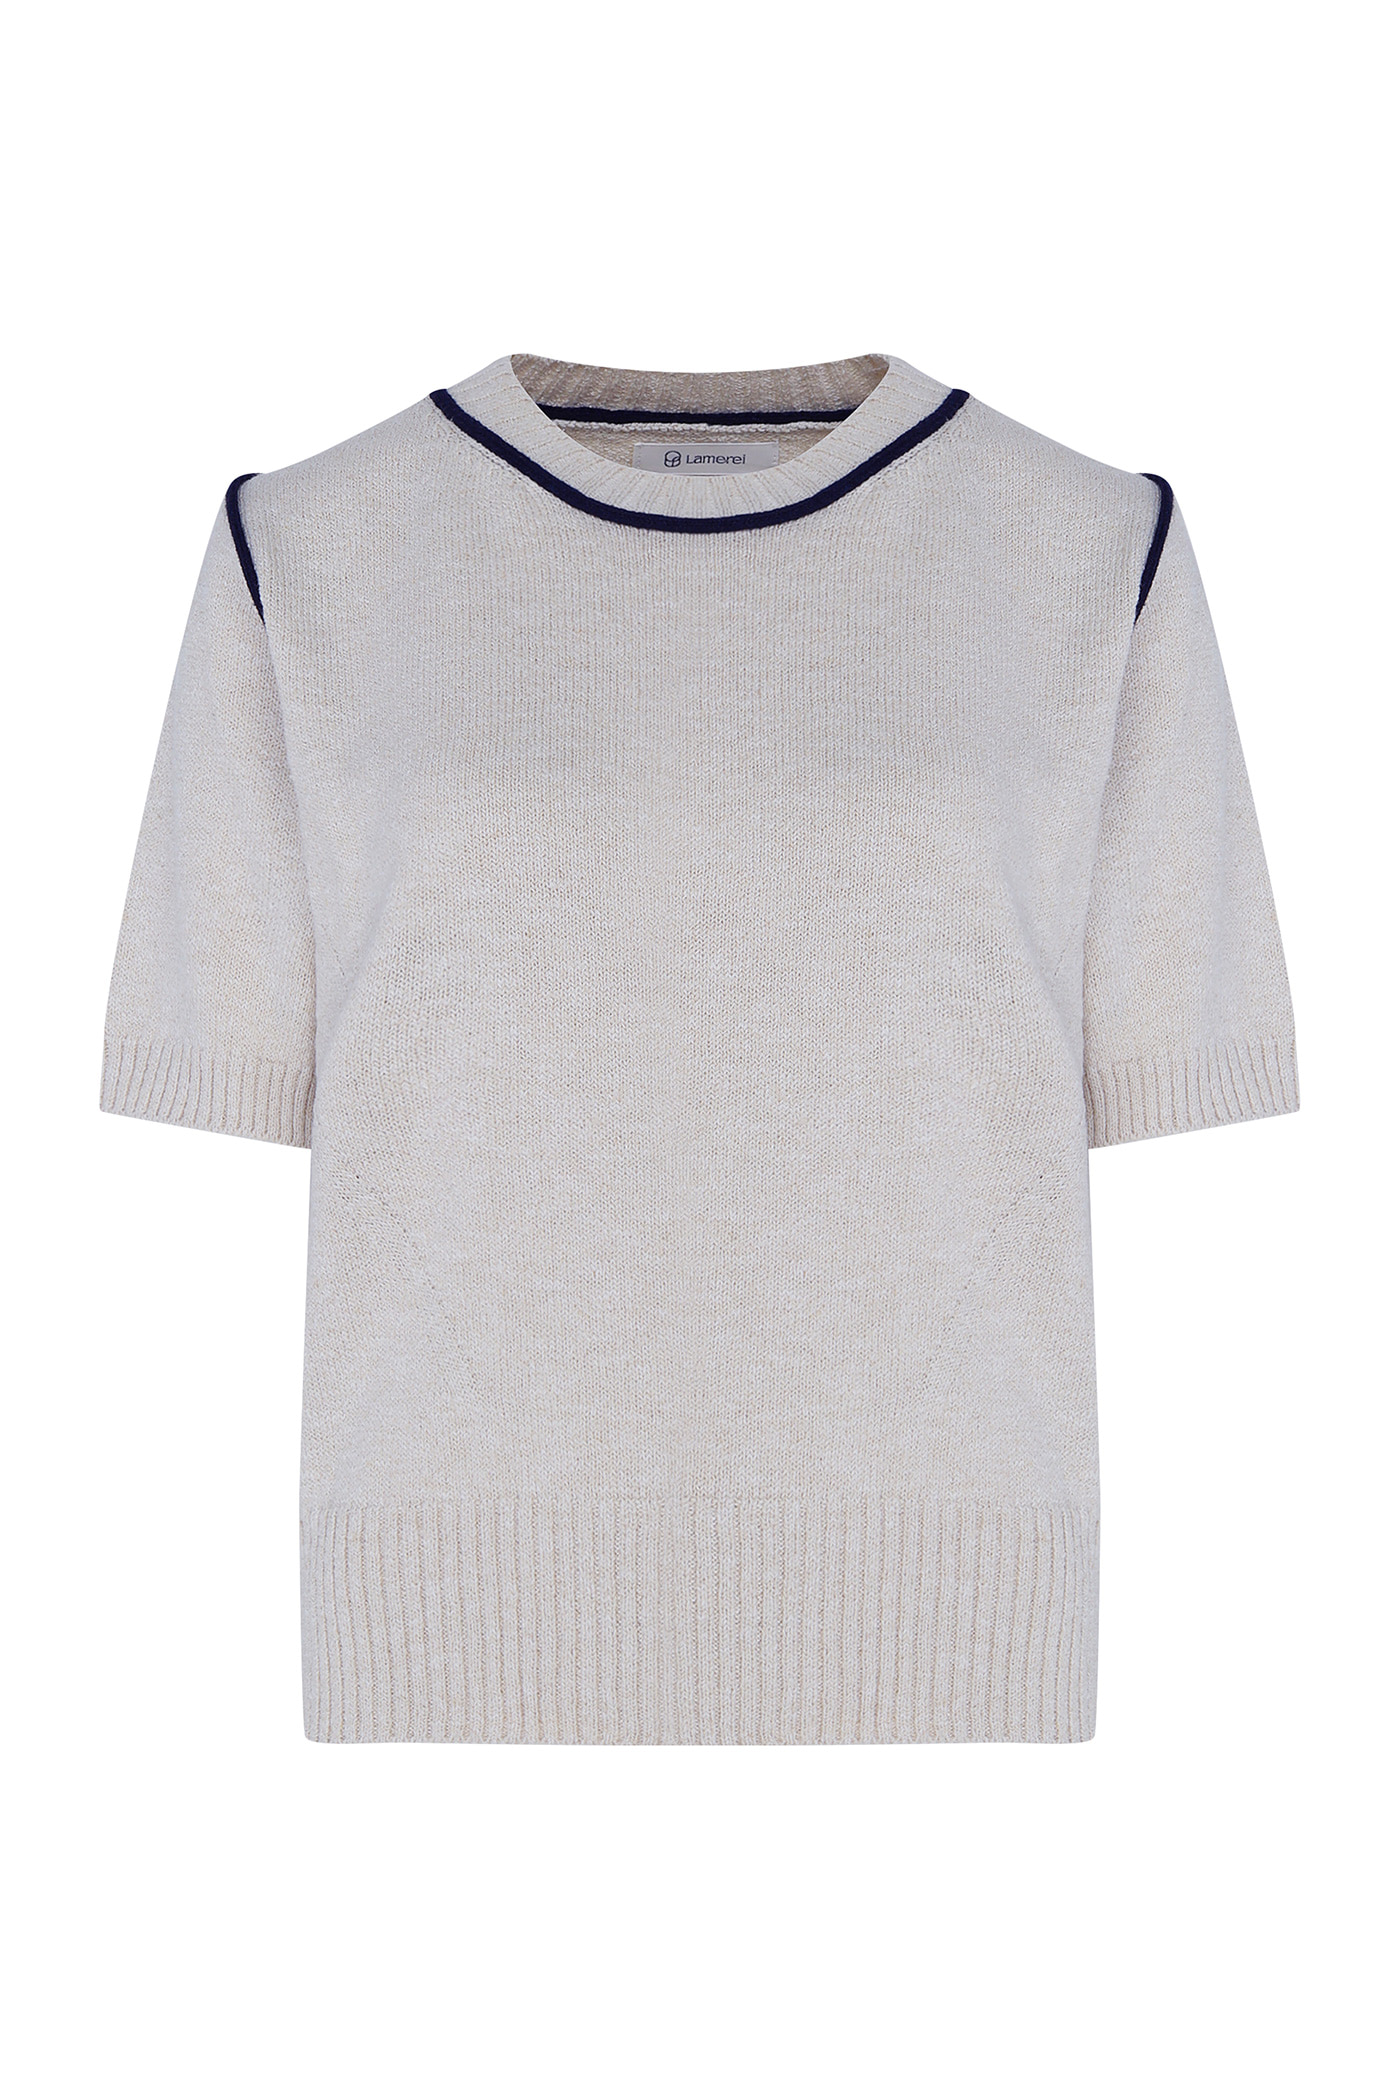 Roll Cotton line knit-Oatmeal